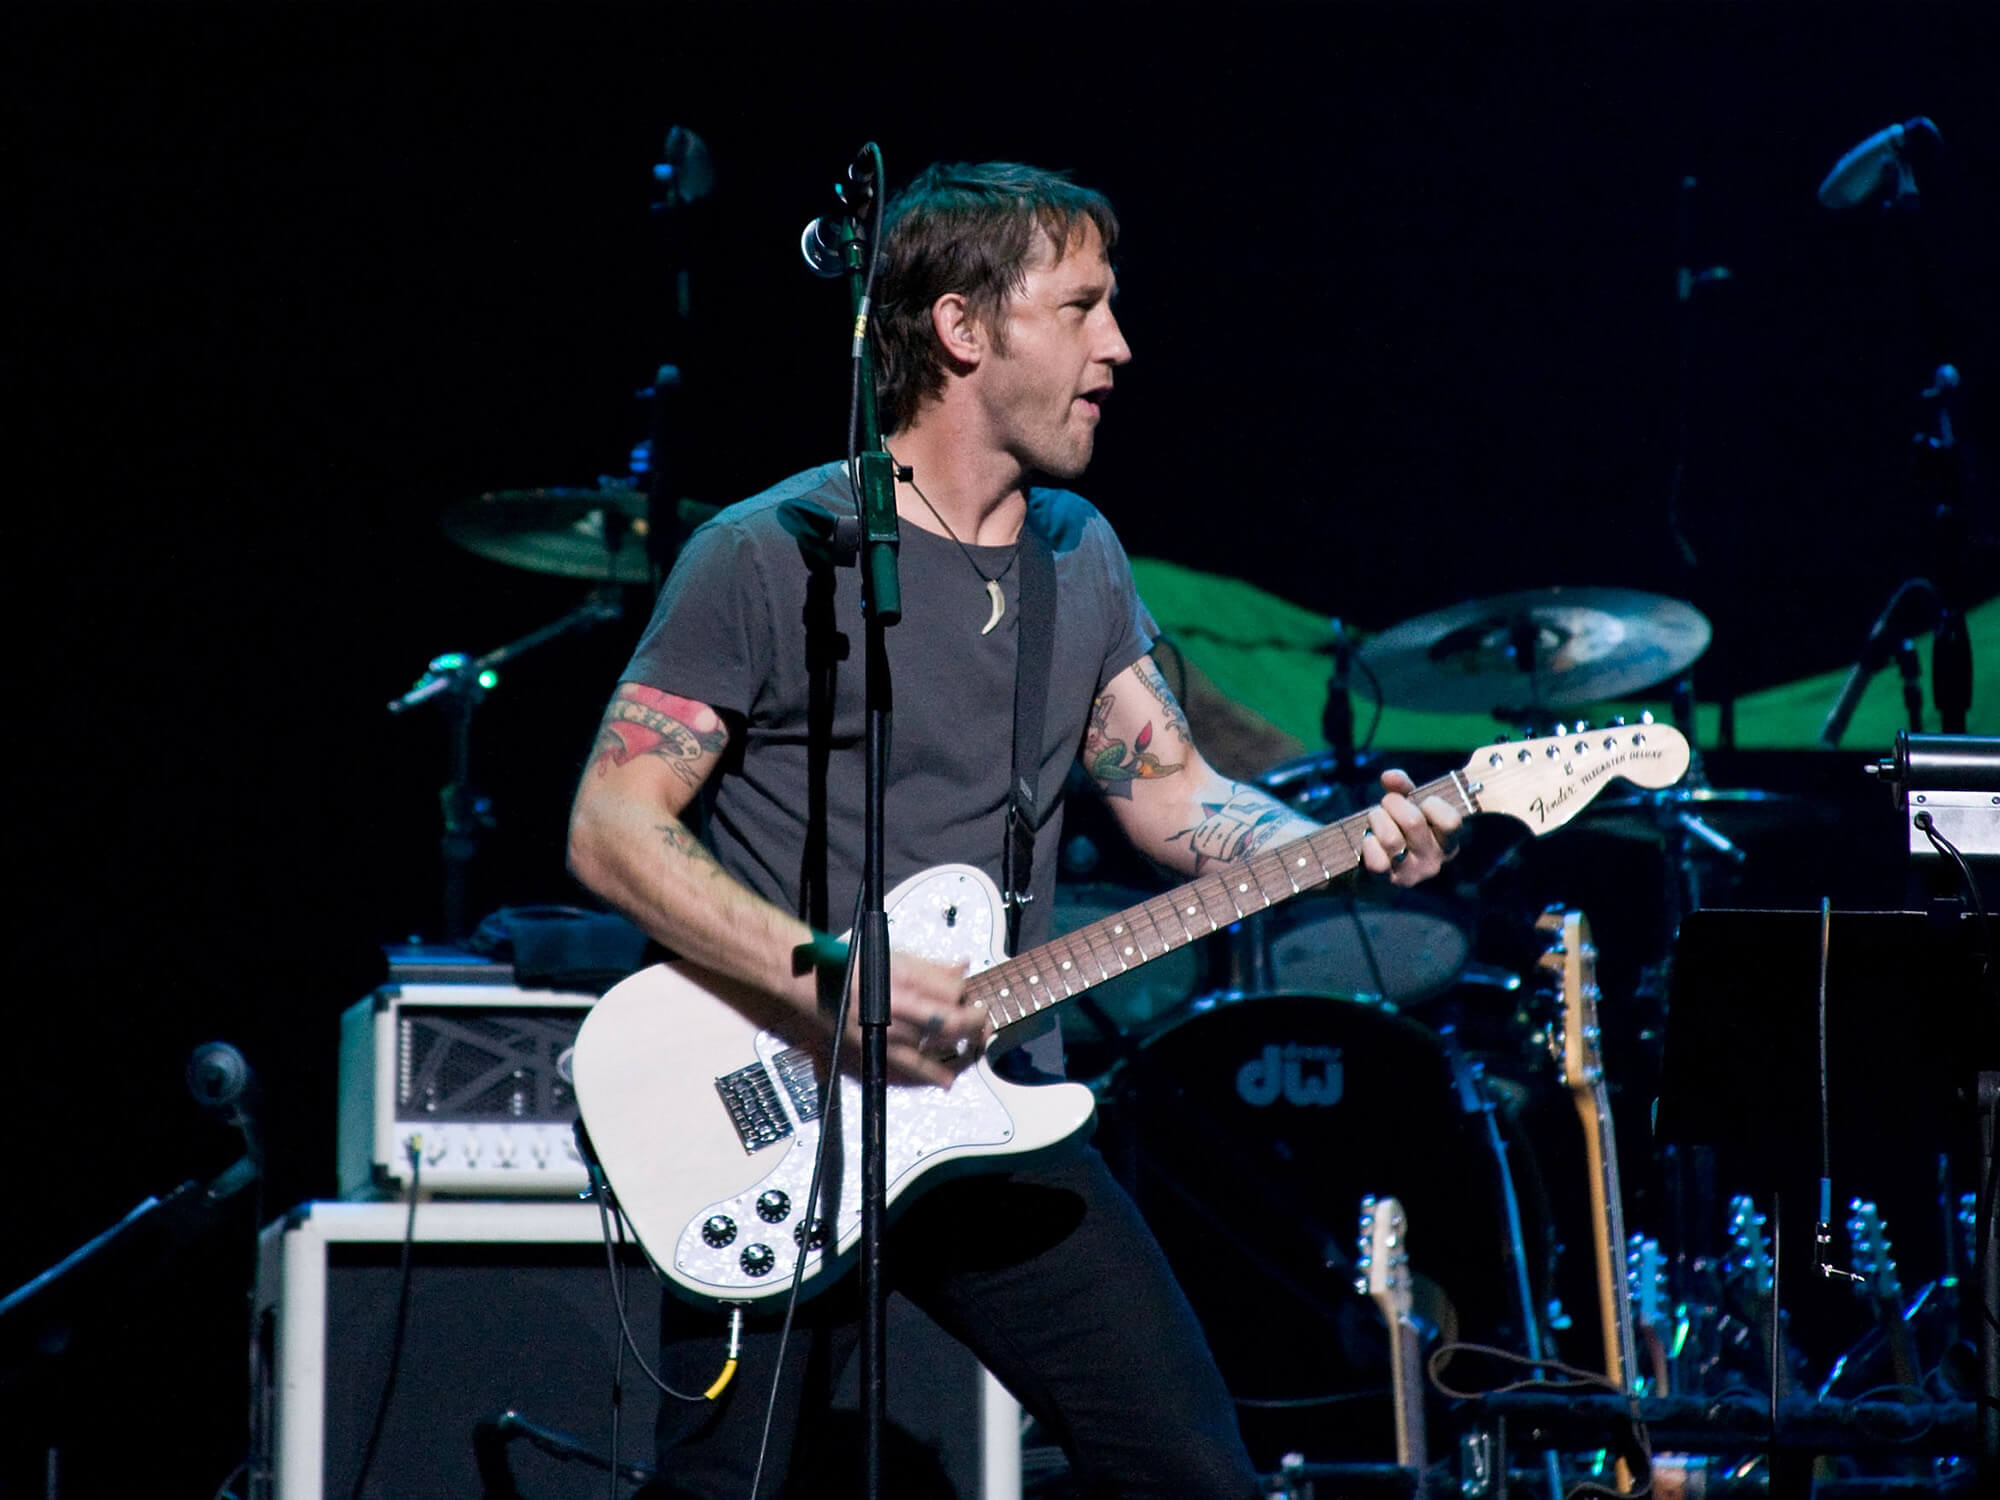 Chris Shiflett in 2012 playing his Telecaster Deluxe on stage.